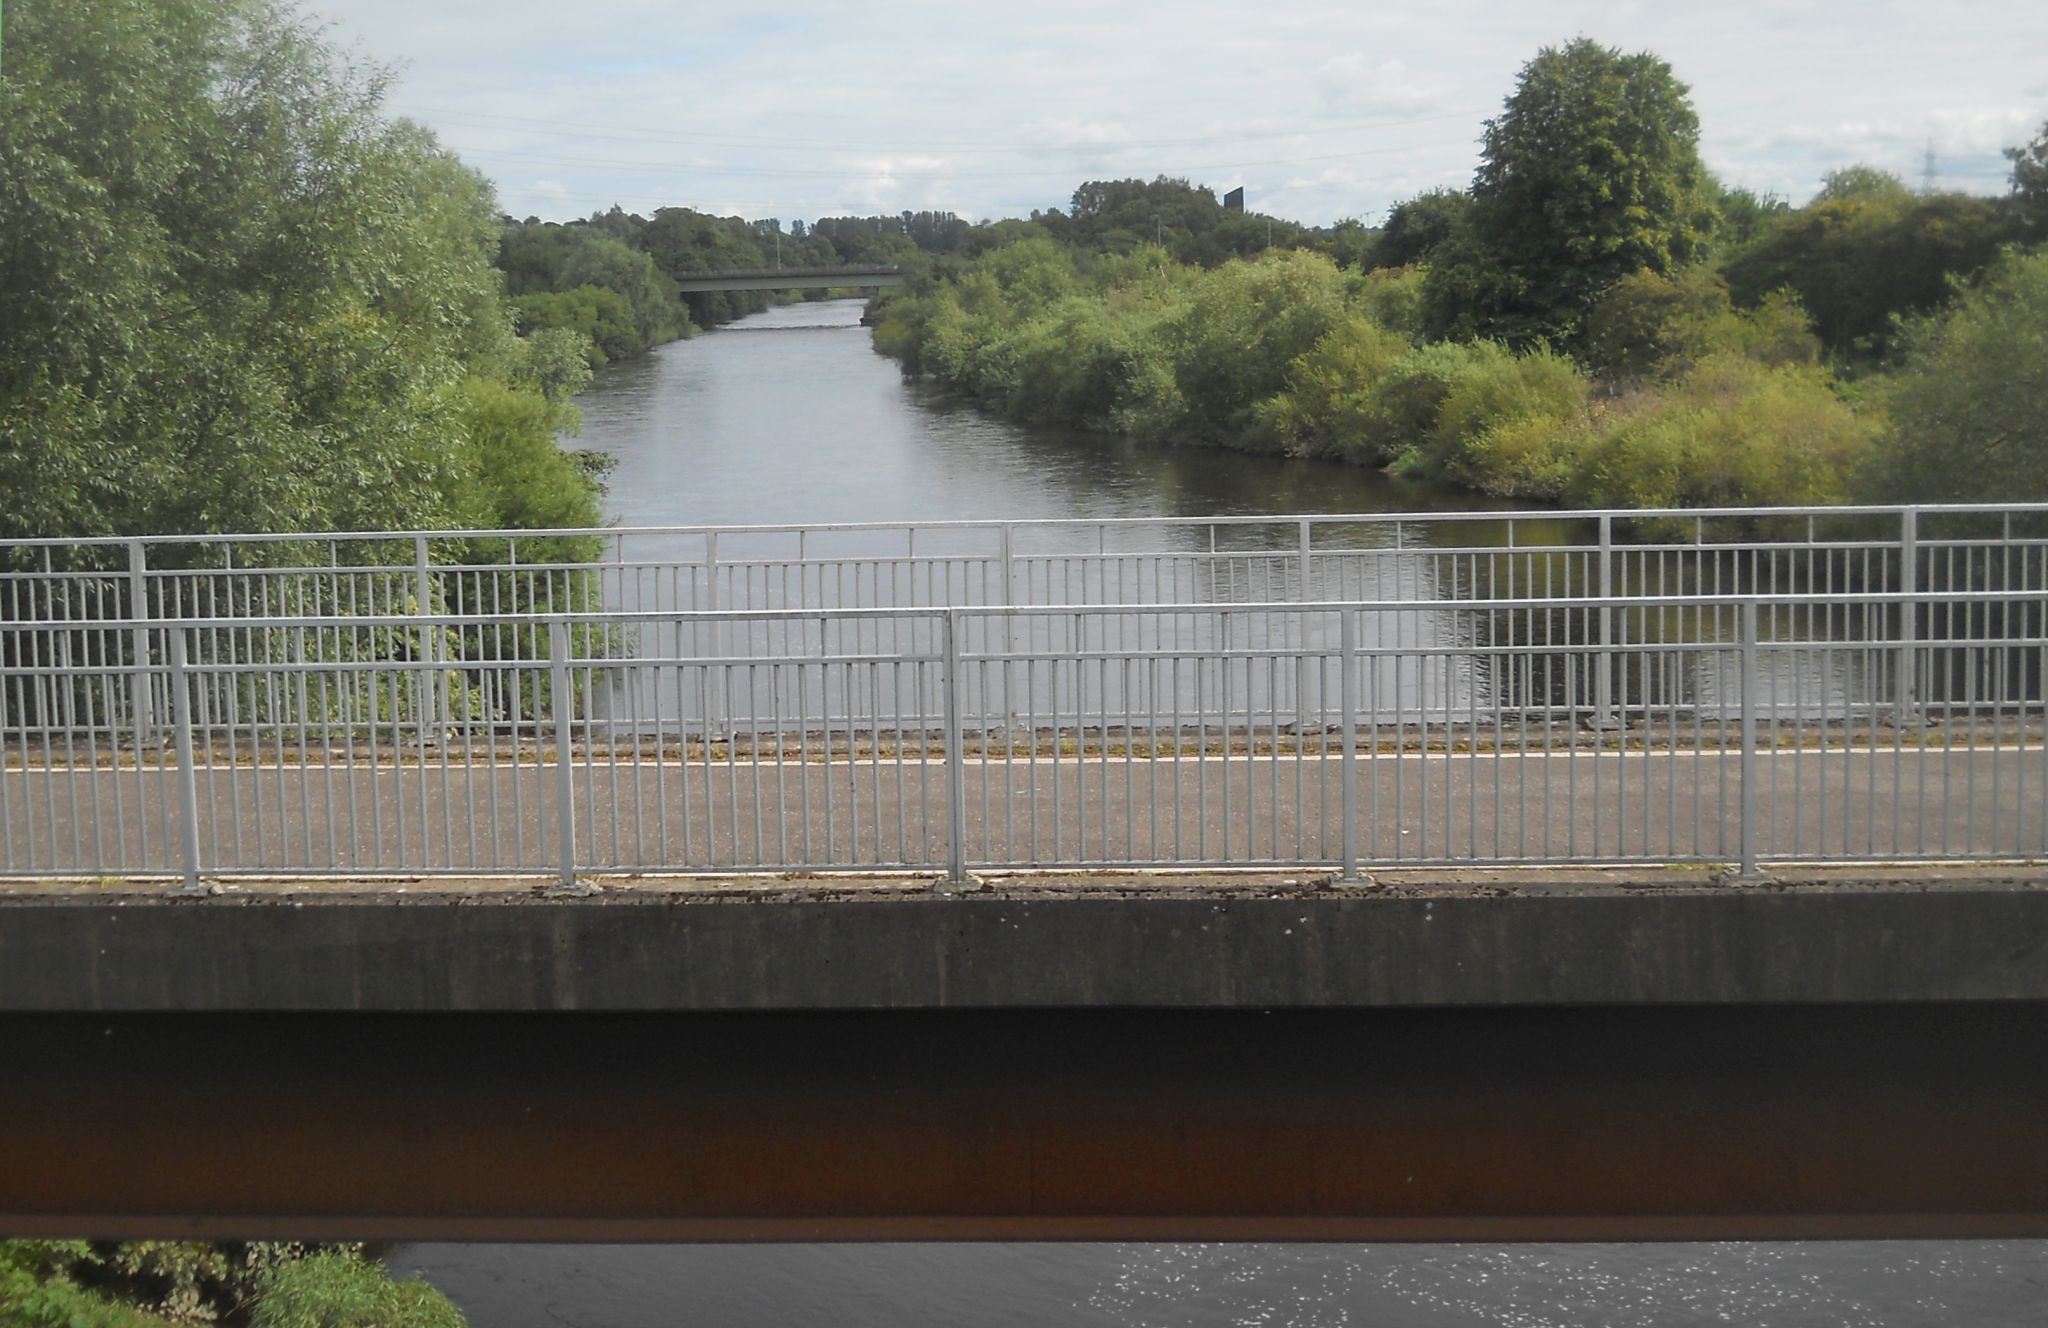 View from Orion Pedestrian Bridge over the River Clyde at Cambuslang